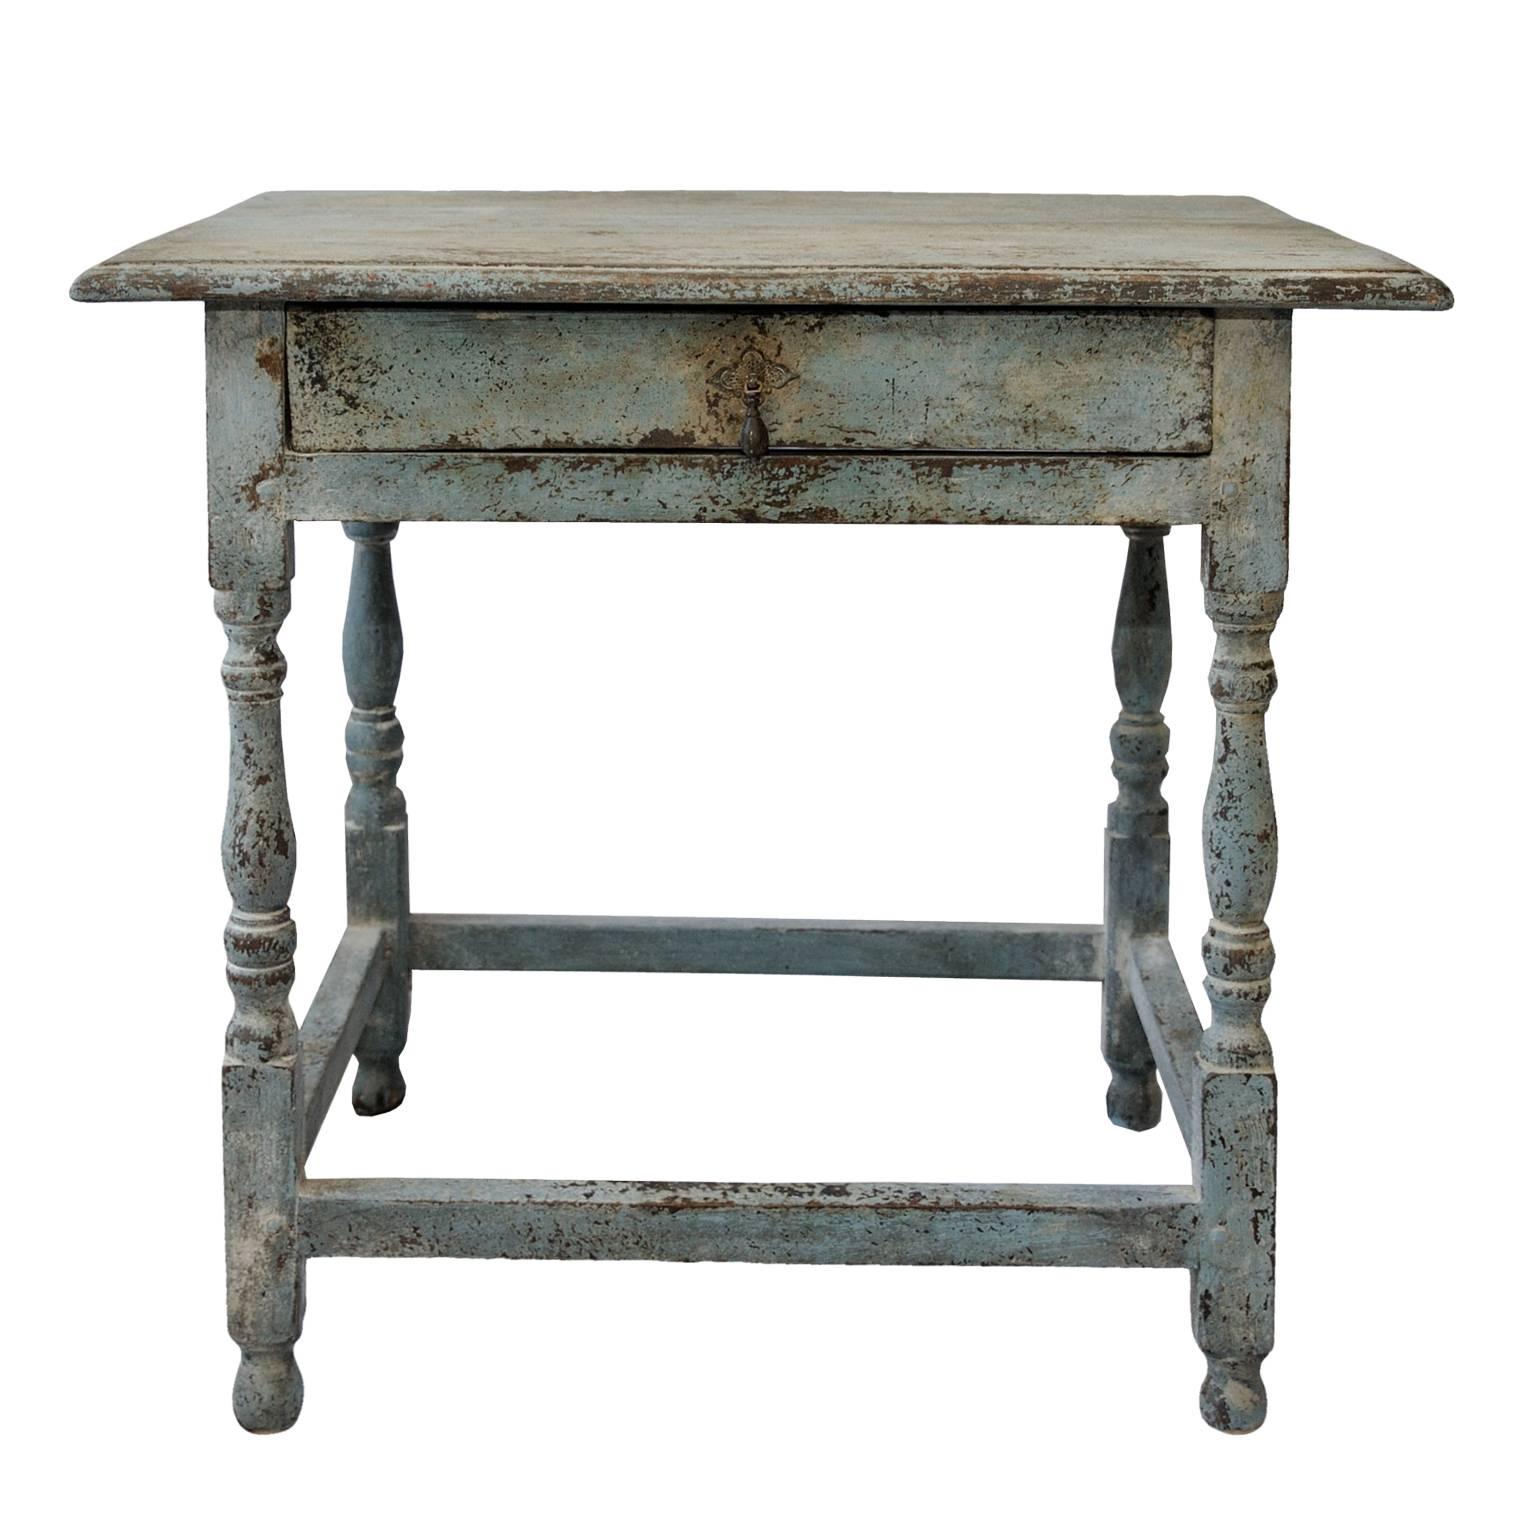 This is a rather lovely English mid-18th century George II painted side table. The top with moulded edges, the frieze with single drawer and 'teardrop' handle. Standing on block and turned legs joined by stretchers, circa 1740.
(Paintwork